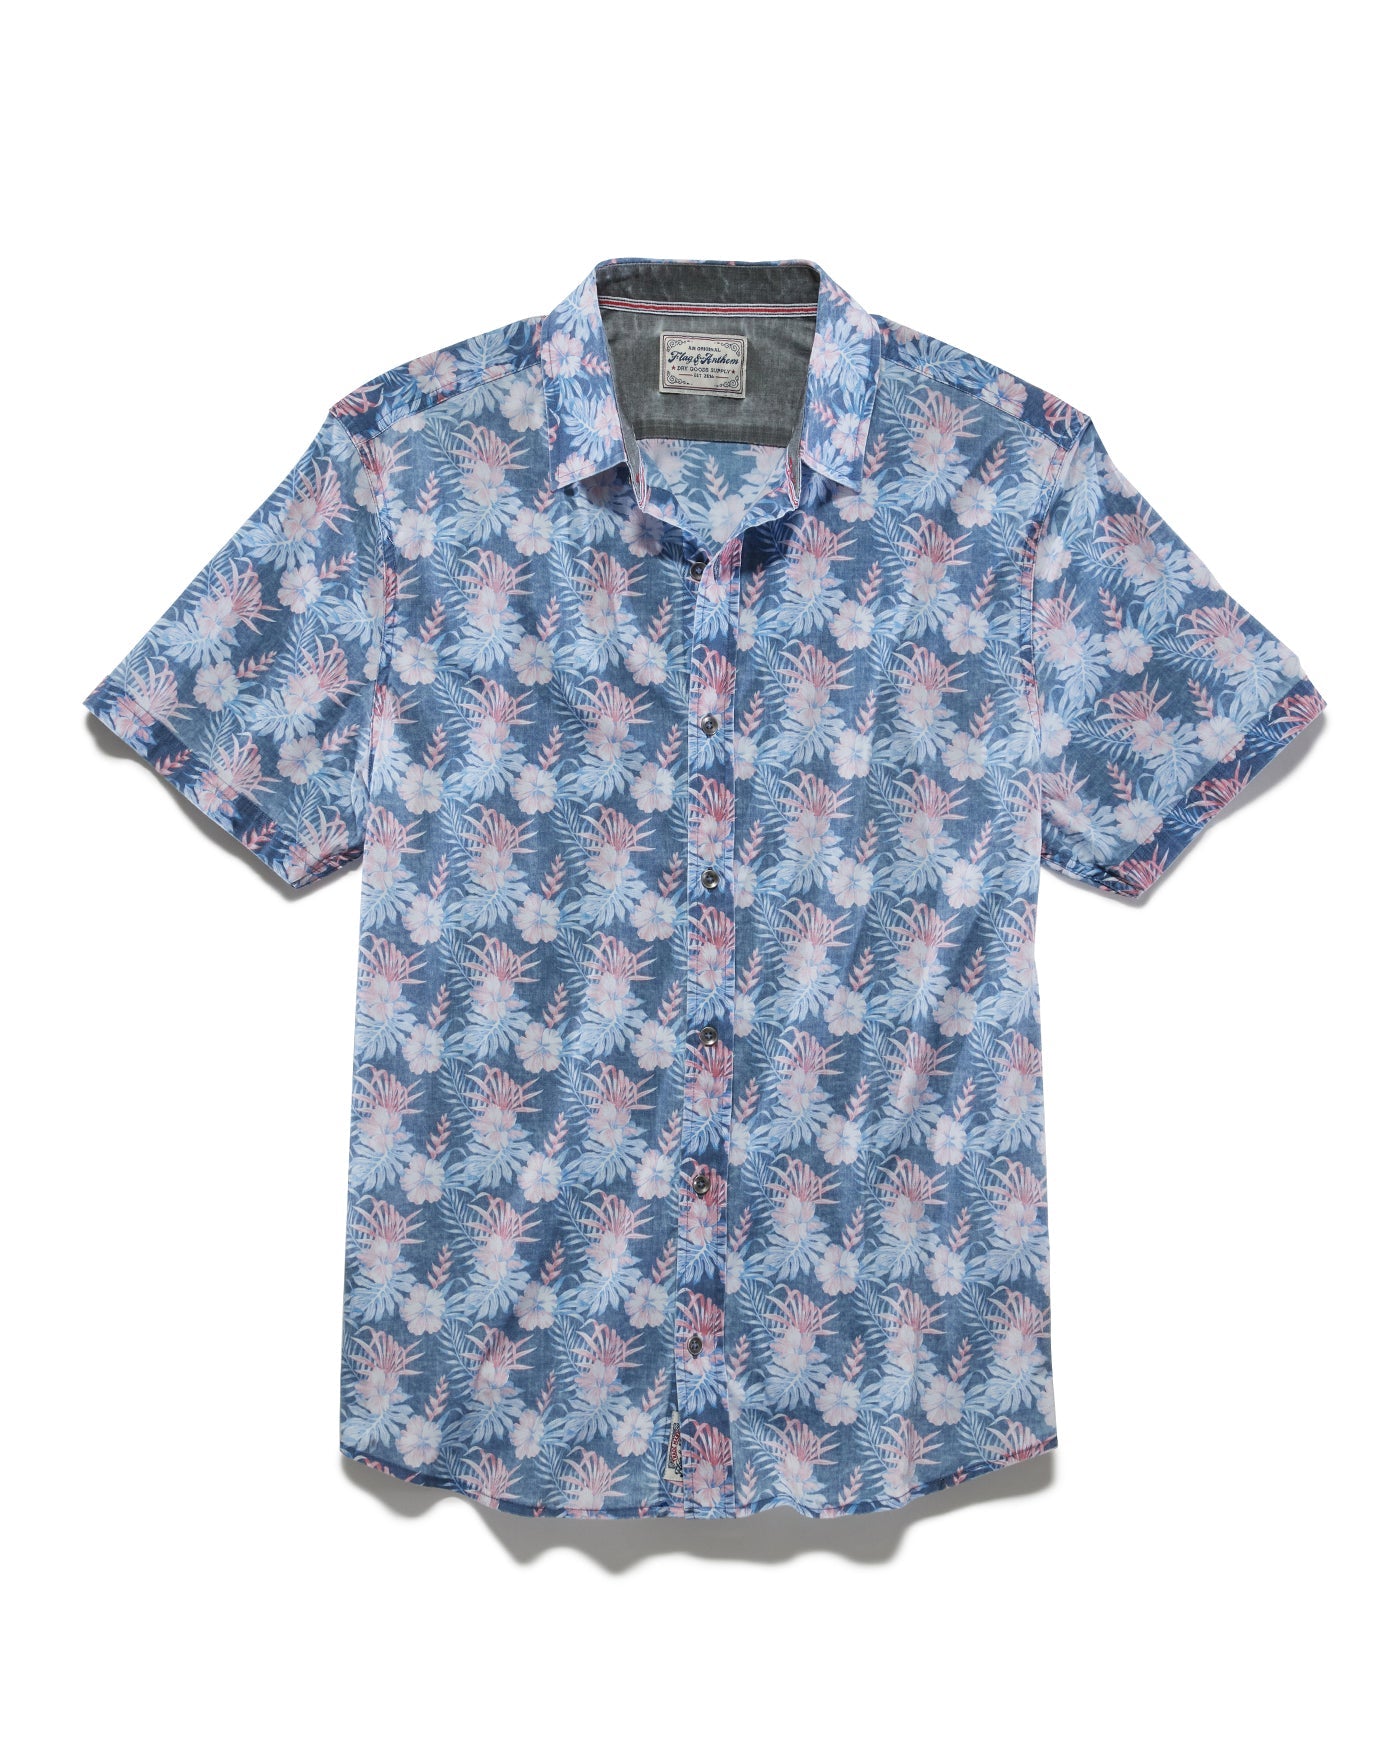 Puckett Vintage Soft Hibiscus Print Shirt-Men's Tops-Vixen Collection, Day Spa and Women's Boutique Located in Seattle, Washington